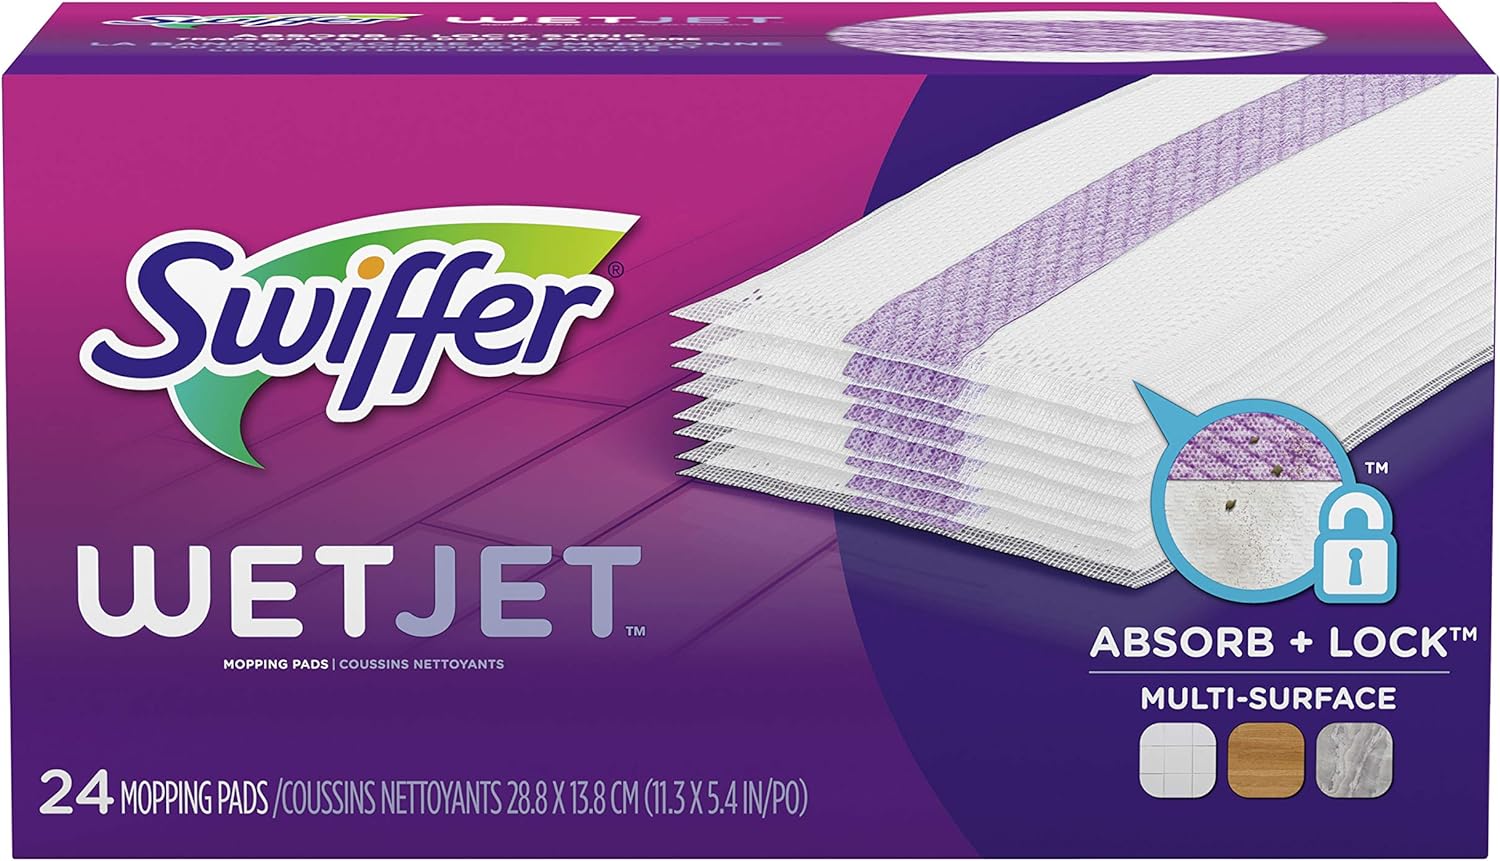 I just bought a condo with all vinyl plank flooring and that required a different approach to cleaning. I tried the Swiffer WetJet, along with the Swiffer cleaning solution and these pads and they work perfectly! The pads are super easy to attach and they pick up a surprising amount of dirt. They have made floor cleaning a lot less of a chore. I highly recommend the Swiffer WetJet system for hard floors.